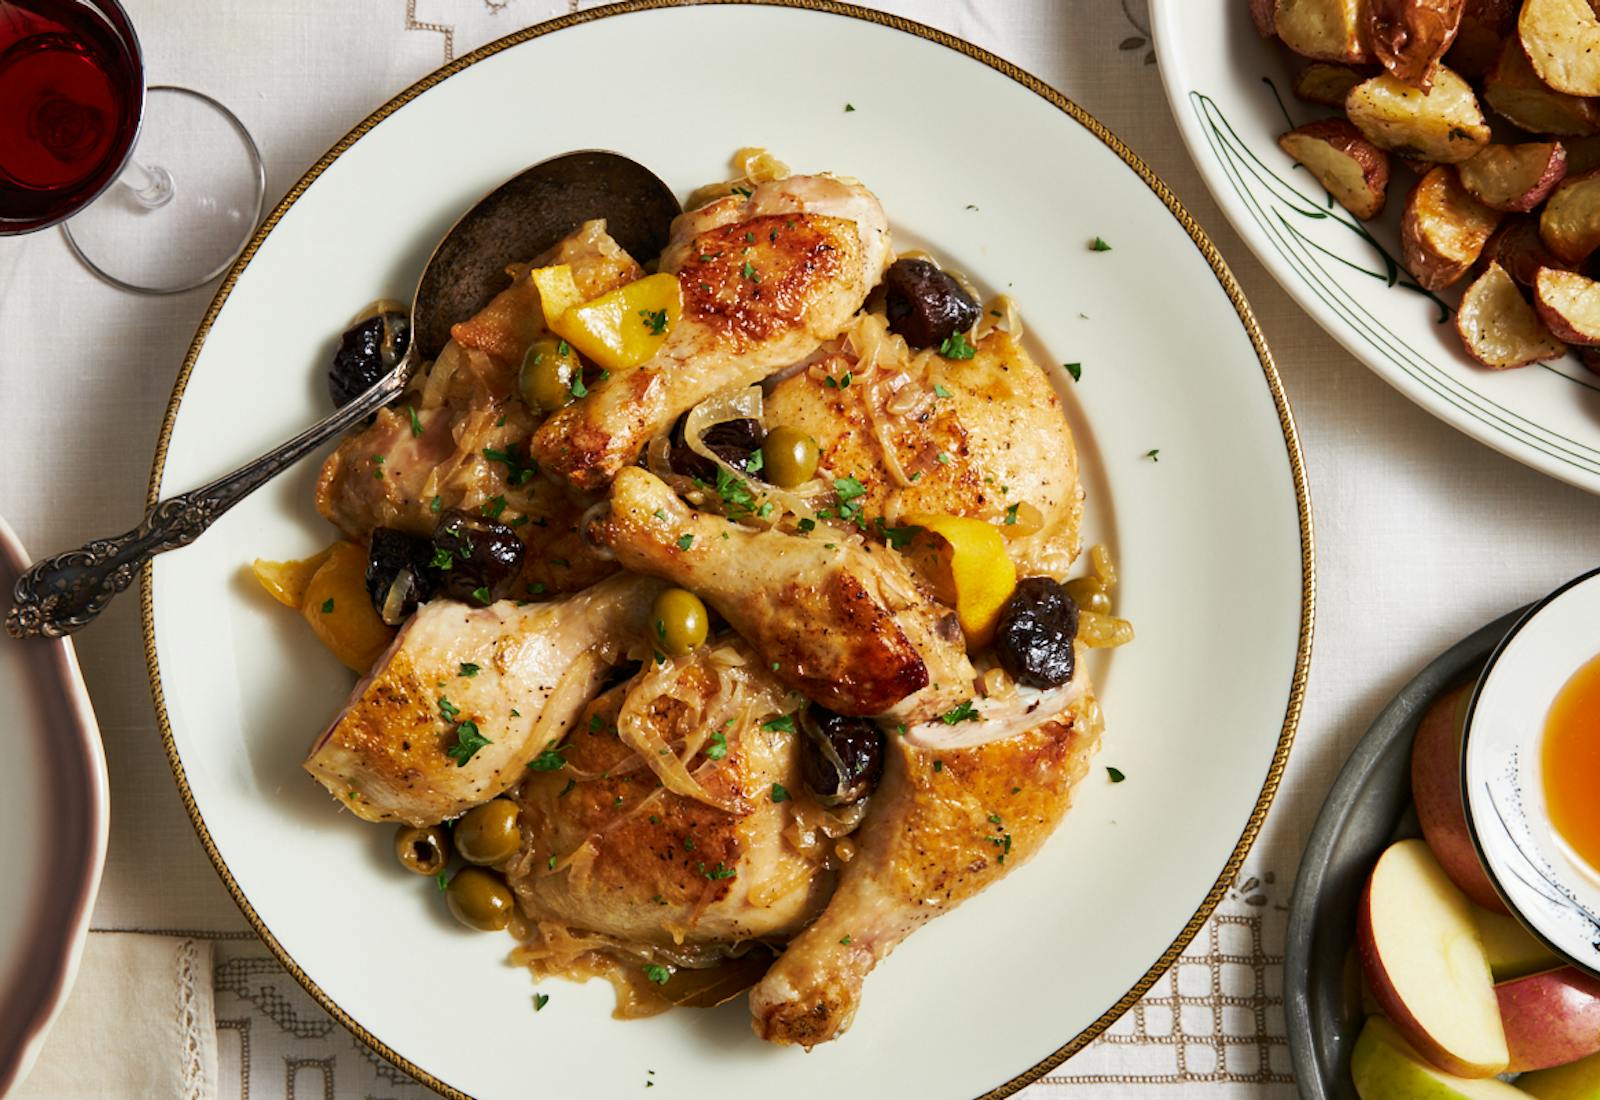 Chicken braised with prunes, olives, and lemon on white plate with serving spoon